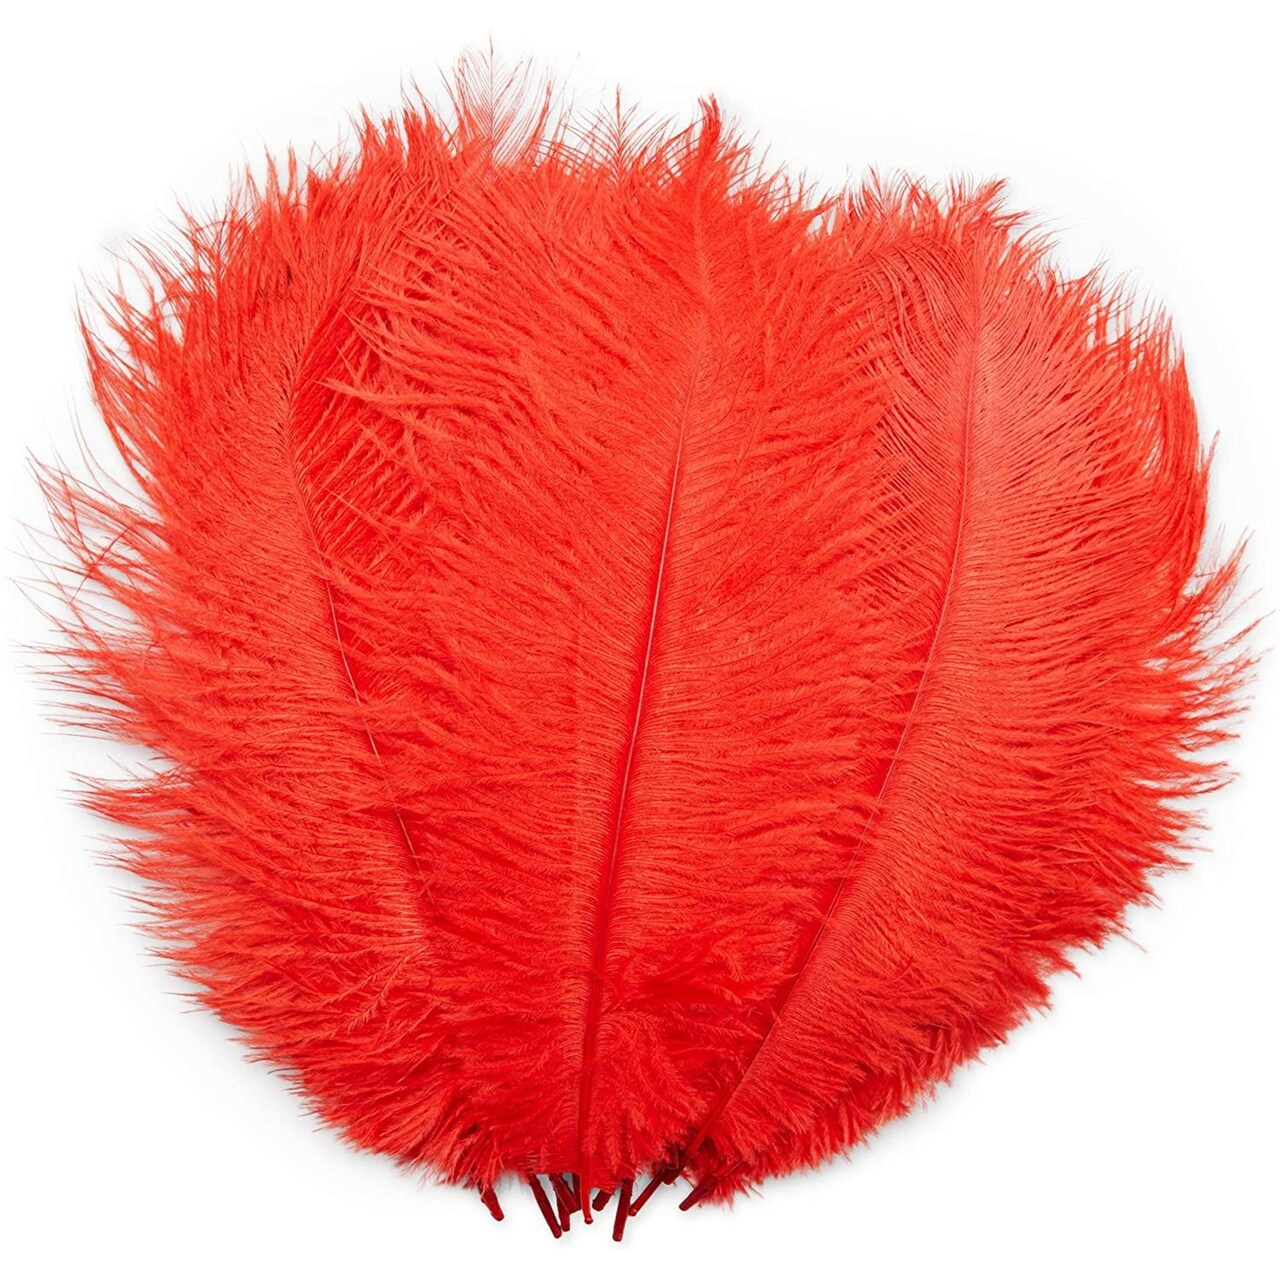 14-Pack Ostrich Feathers, Artificial Feather Plumes for Arts and Crafts,  Faux Bird Plumage Trim for Costume and Outfit Decorations, 12-14-Inch  Quills for Home Decor (Red)